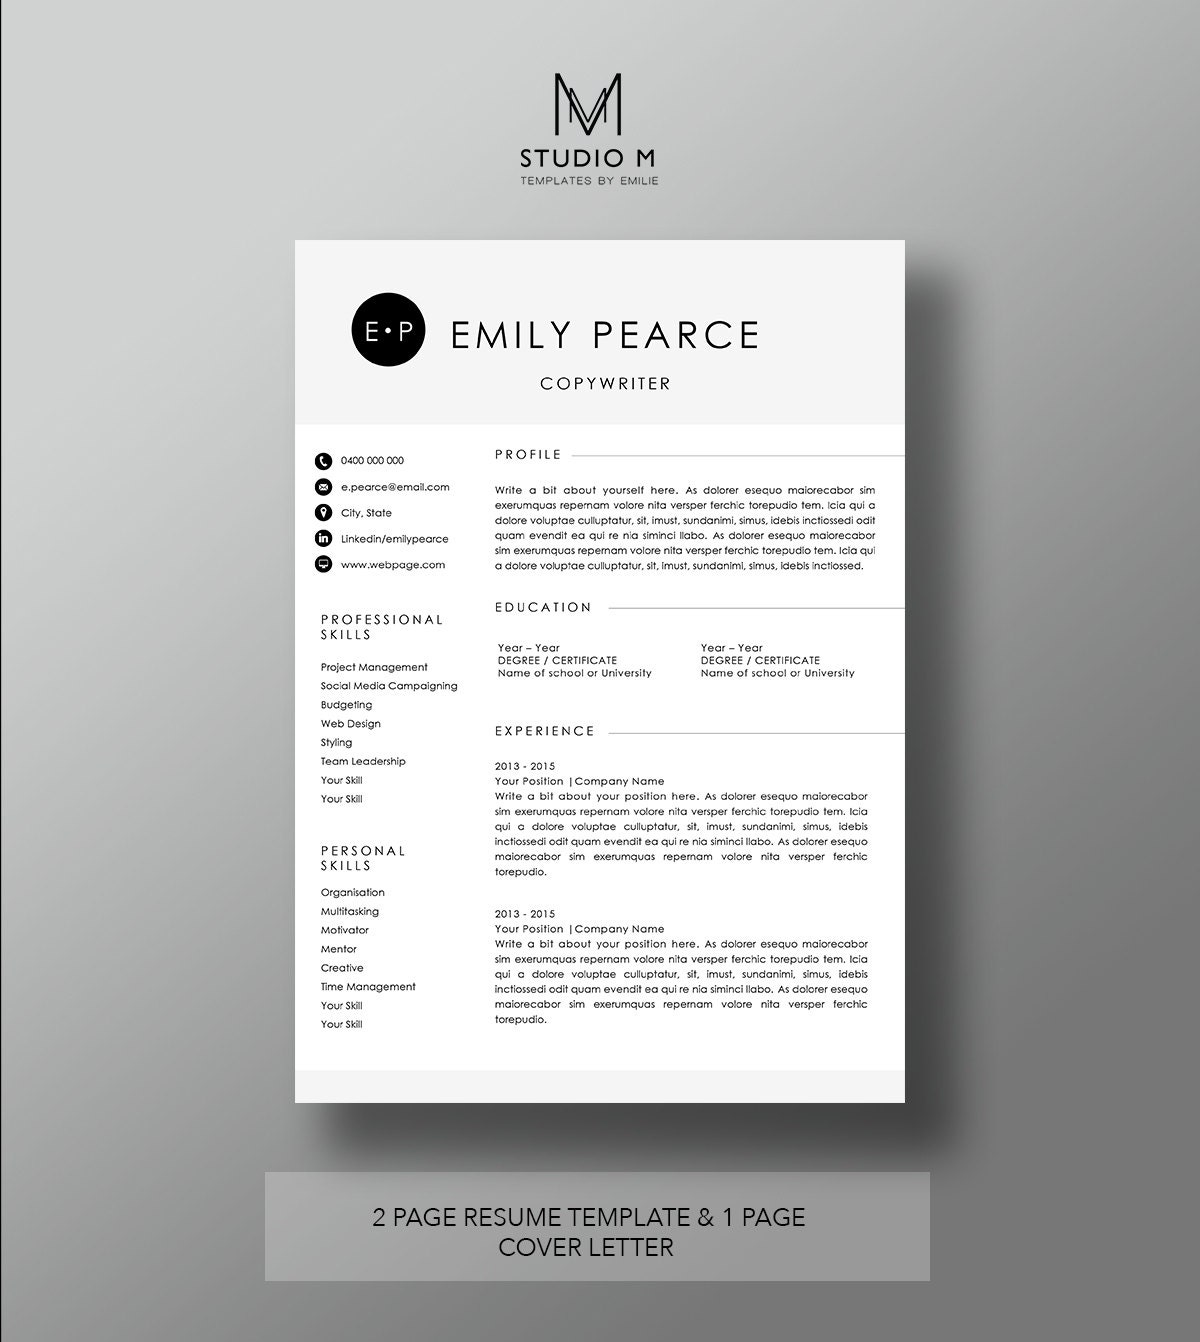 2 page resume template 1 page cover letter professional cv